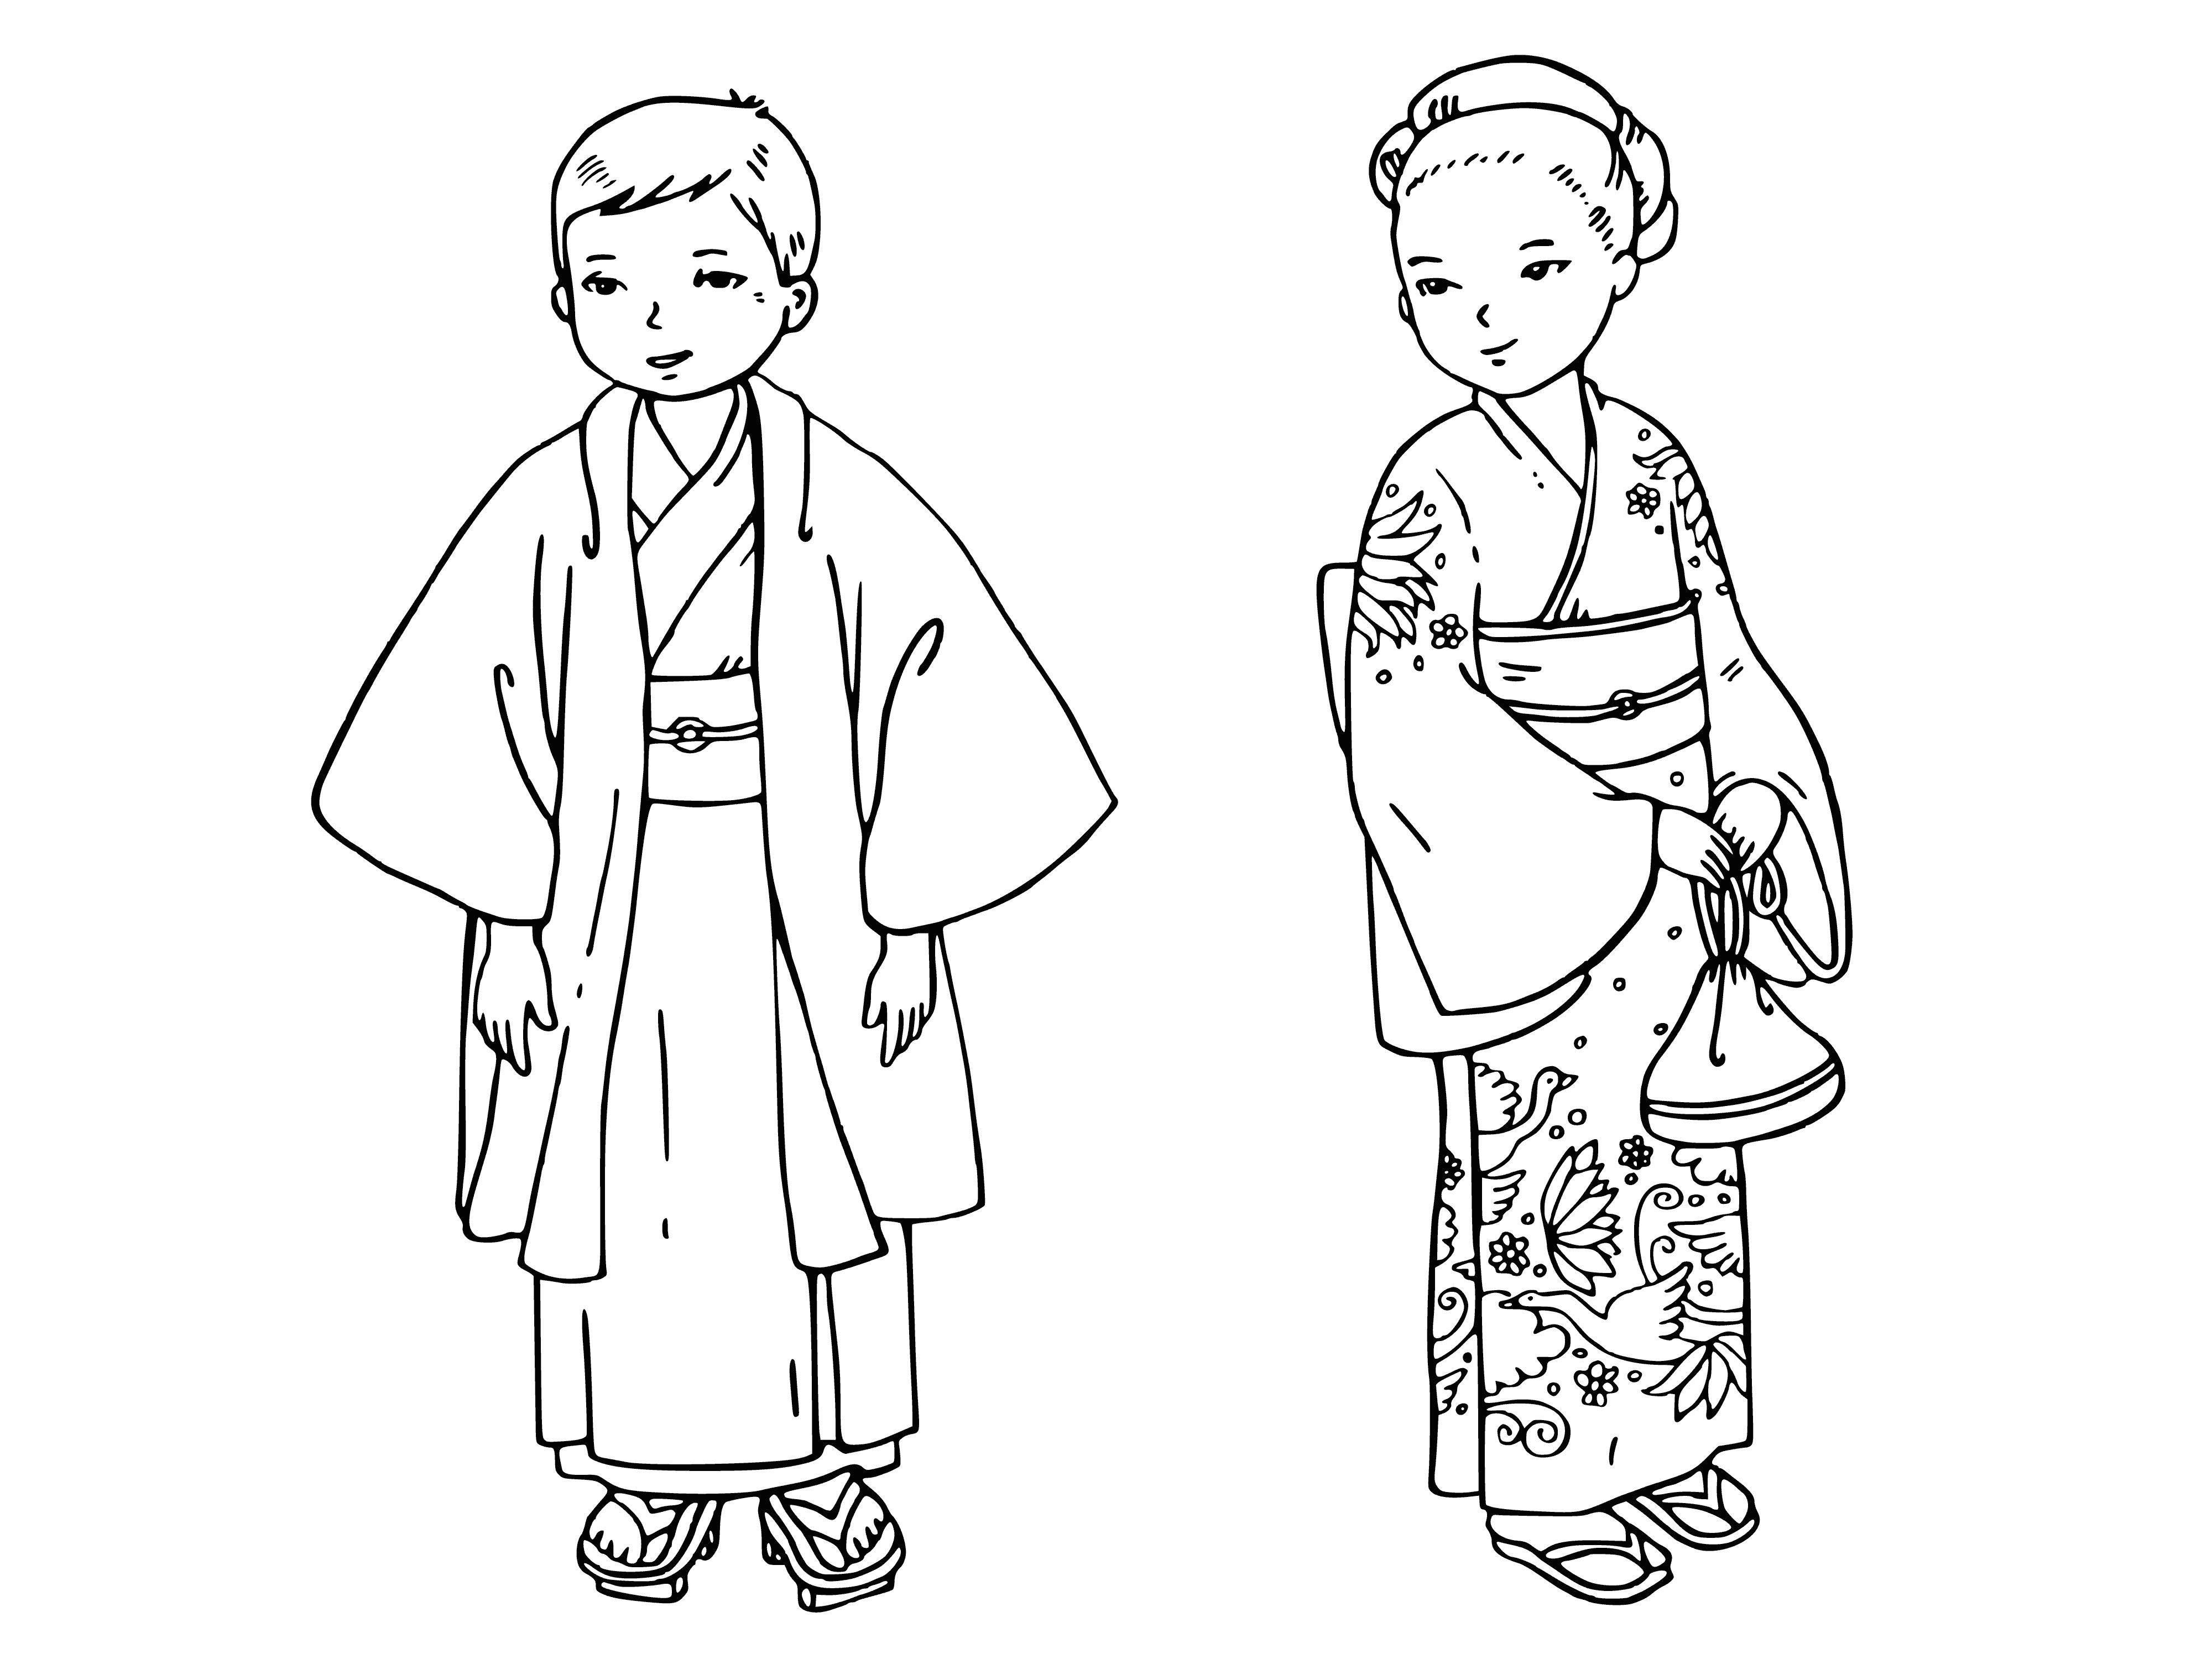 coloring page: Two Japanese children in kimonos on coloring page: girl in red & white flowers; boy in blue & white flowers; both have black hair.